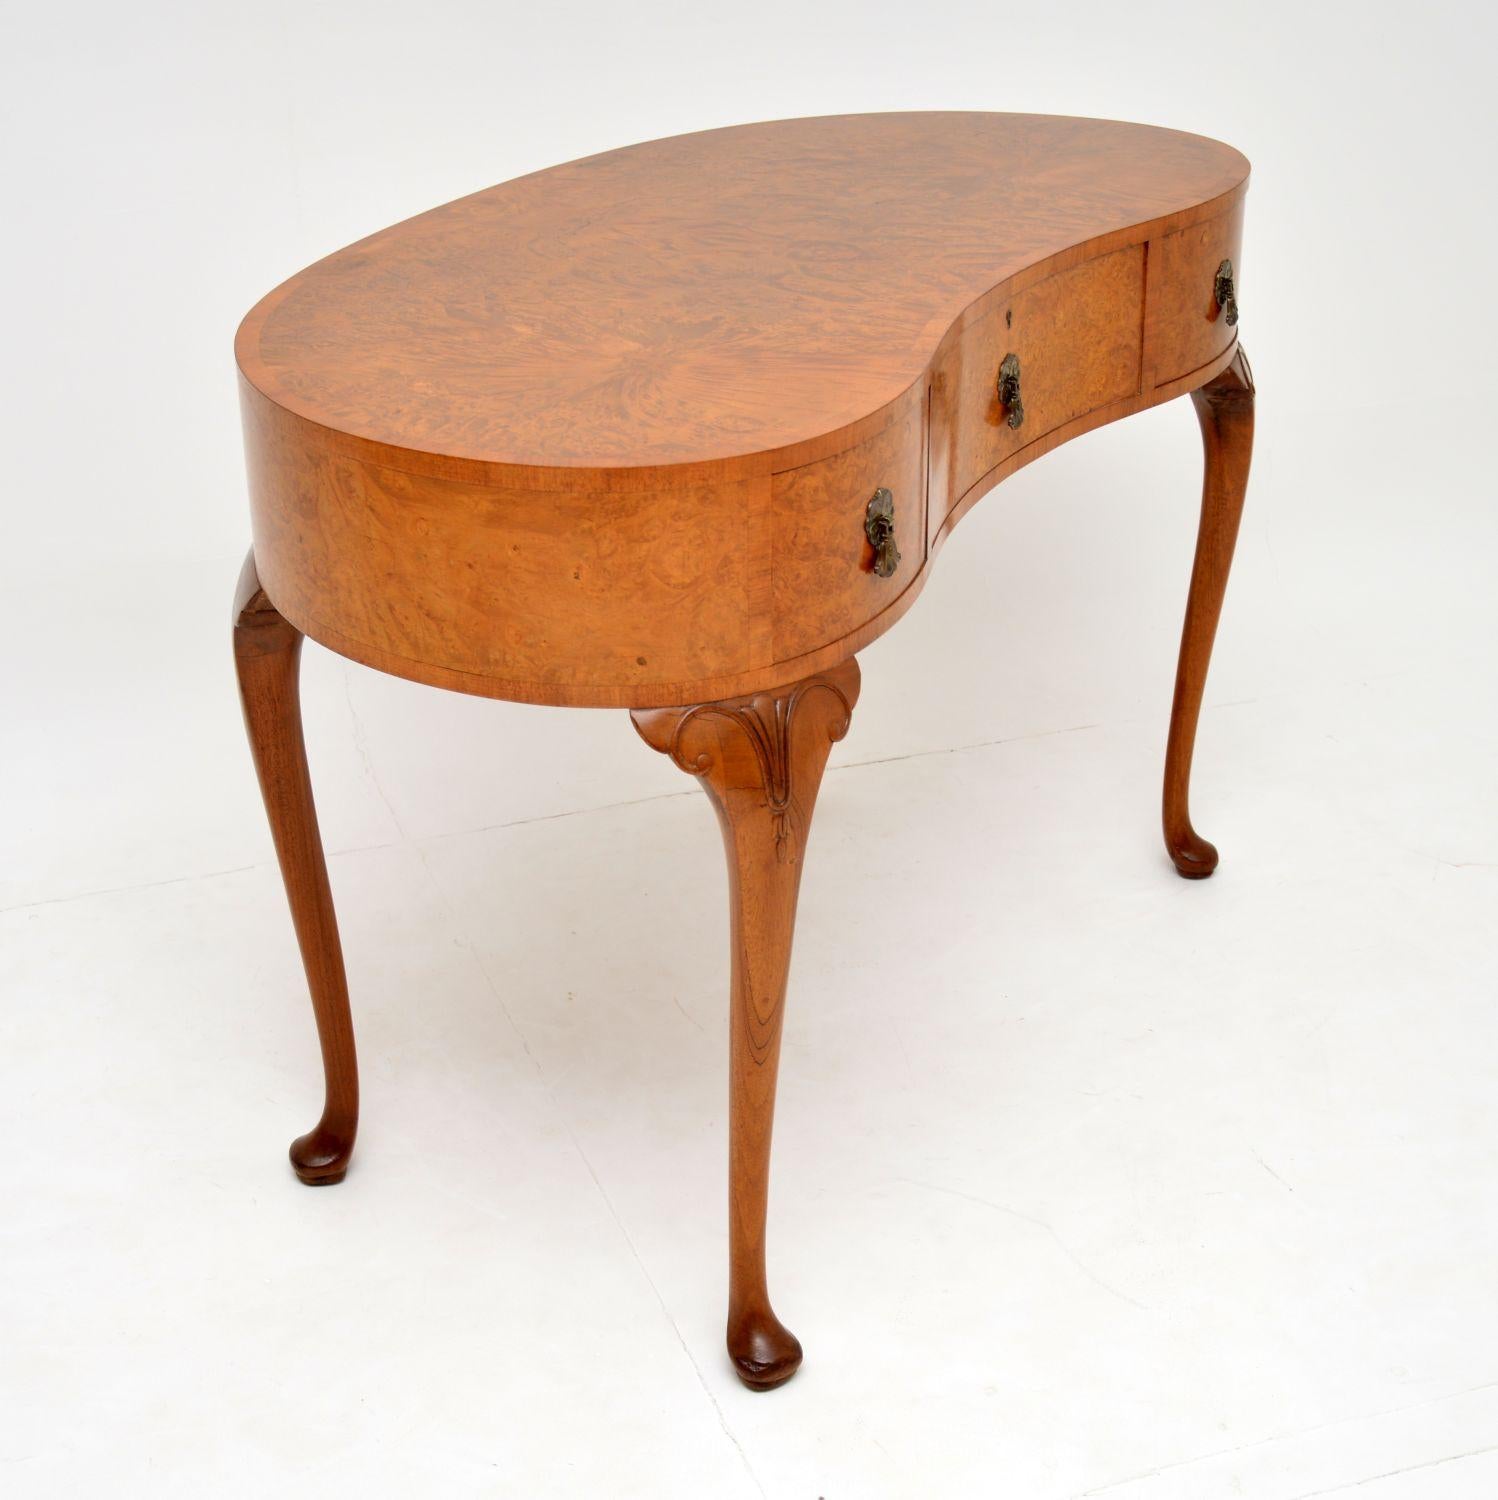 English Antique Burr Walnut Kidney Shaped Desk or Dressing Table by Waring & Gillows